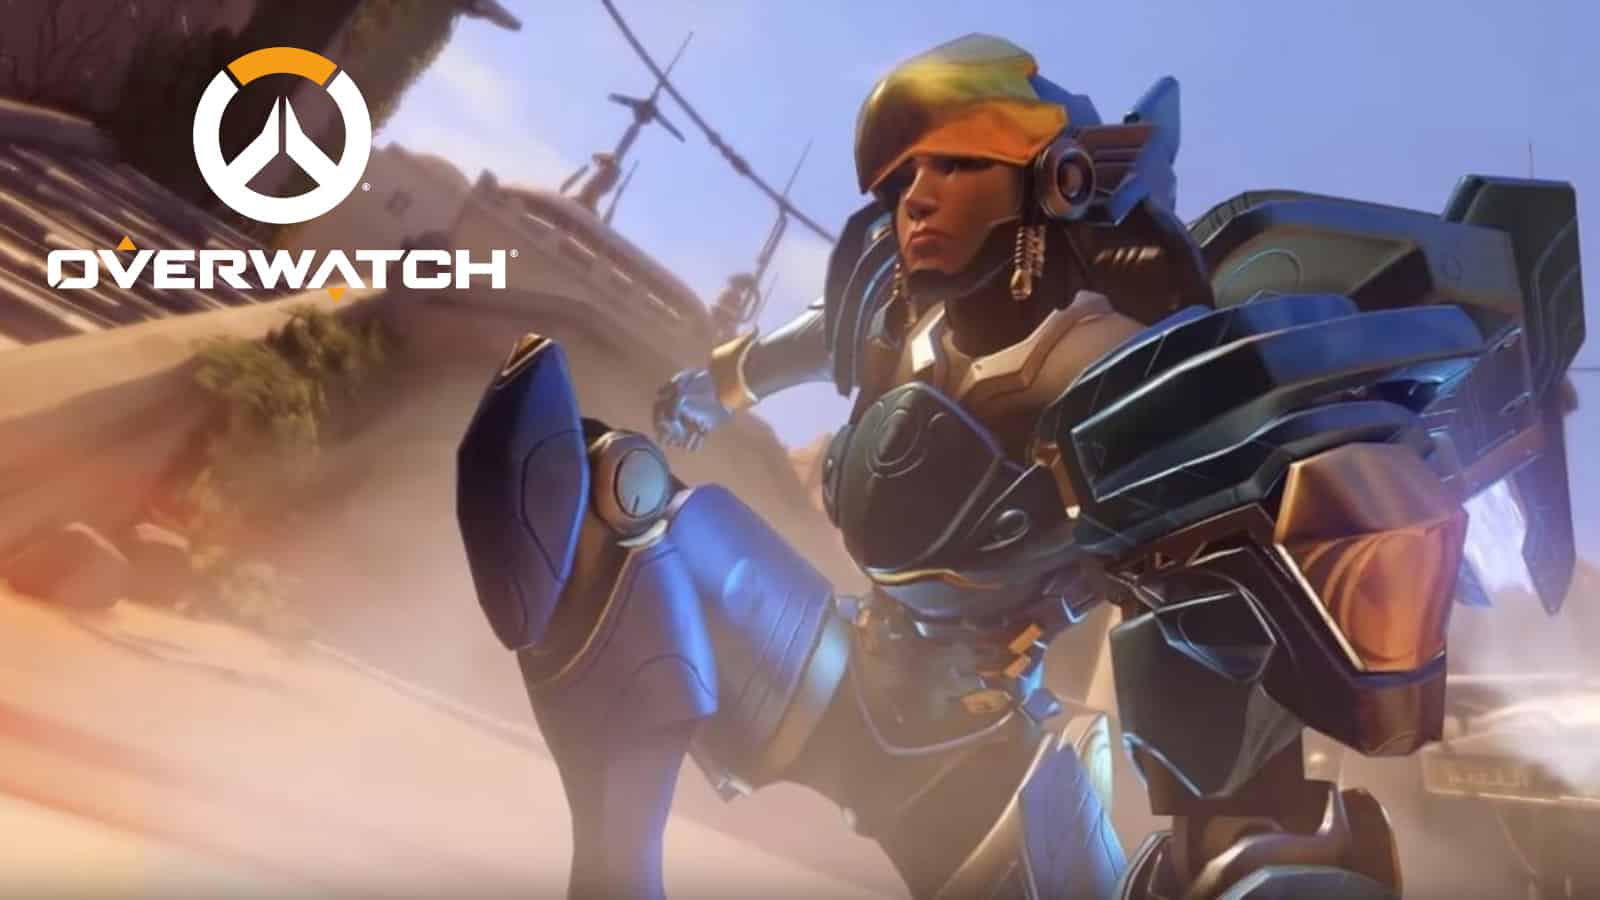 Pharah on Temple of Anubis